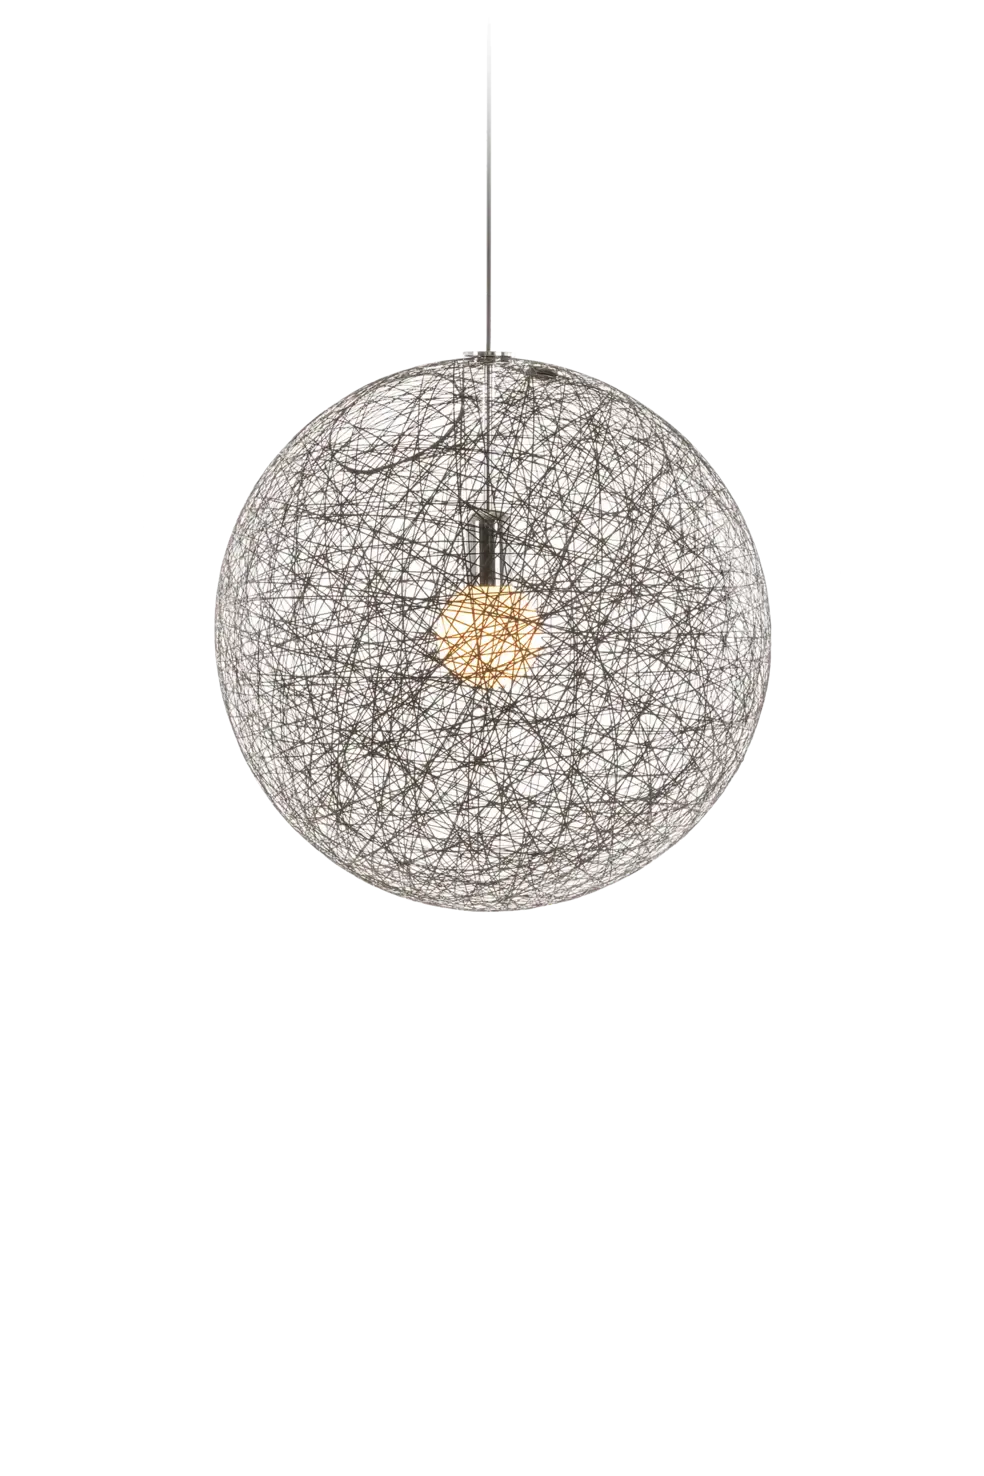 Big ceiling lamp, hanging lights for dining room table, hanging modern ceiling lights, pendant ceiling lights for living room,  large ceiling lamp